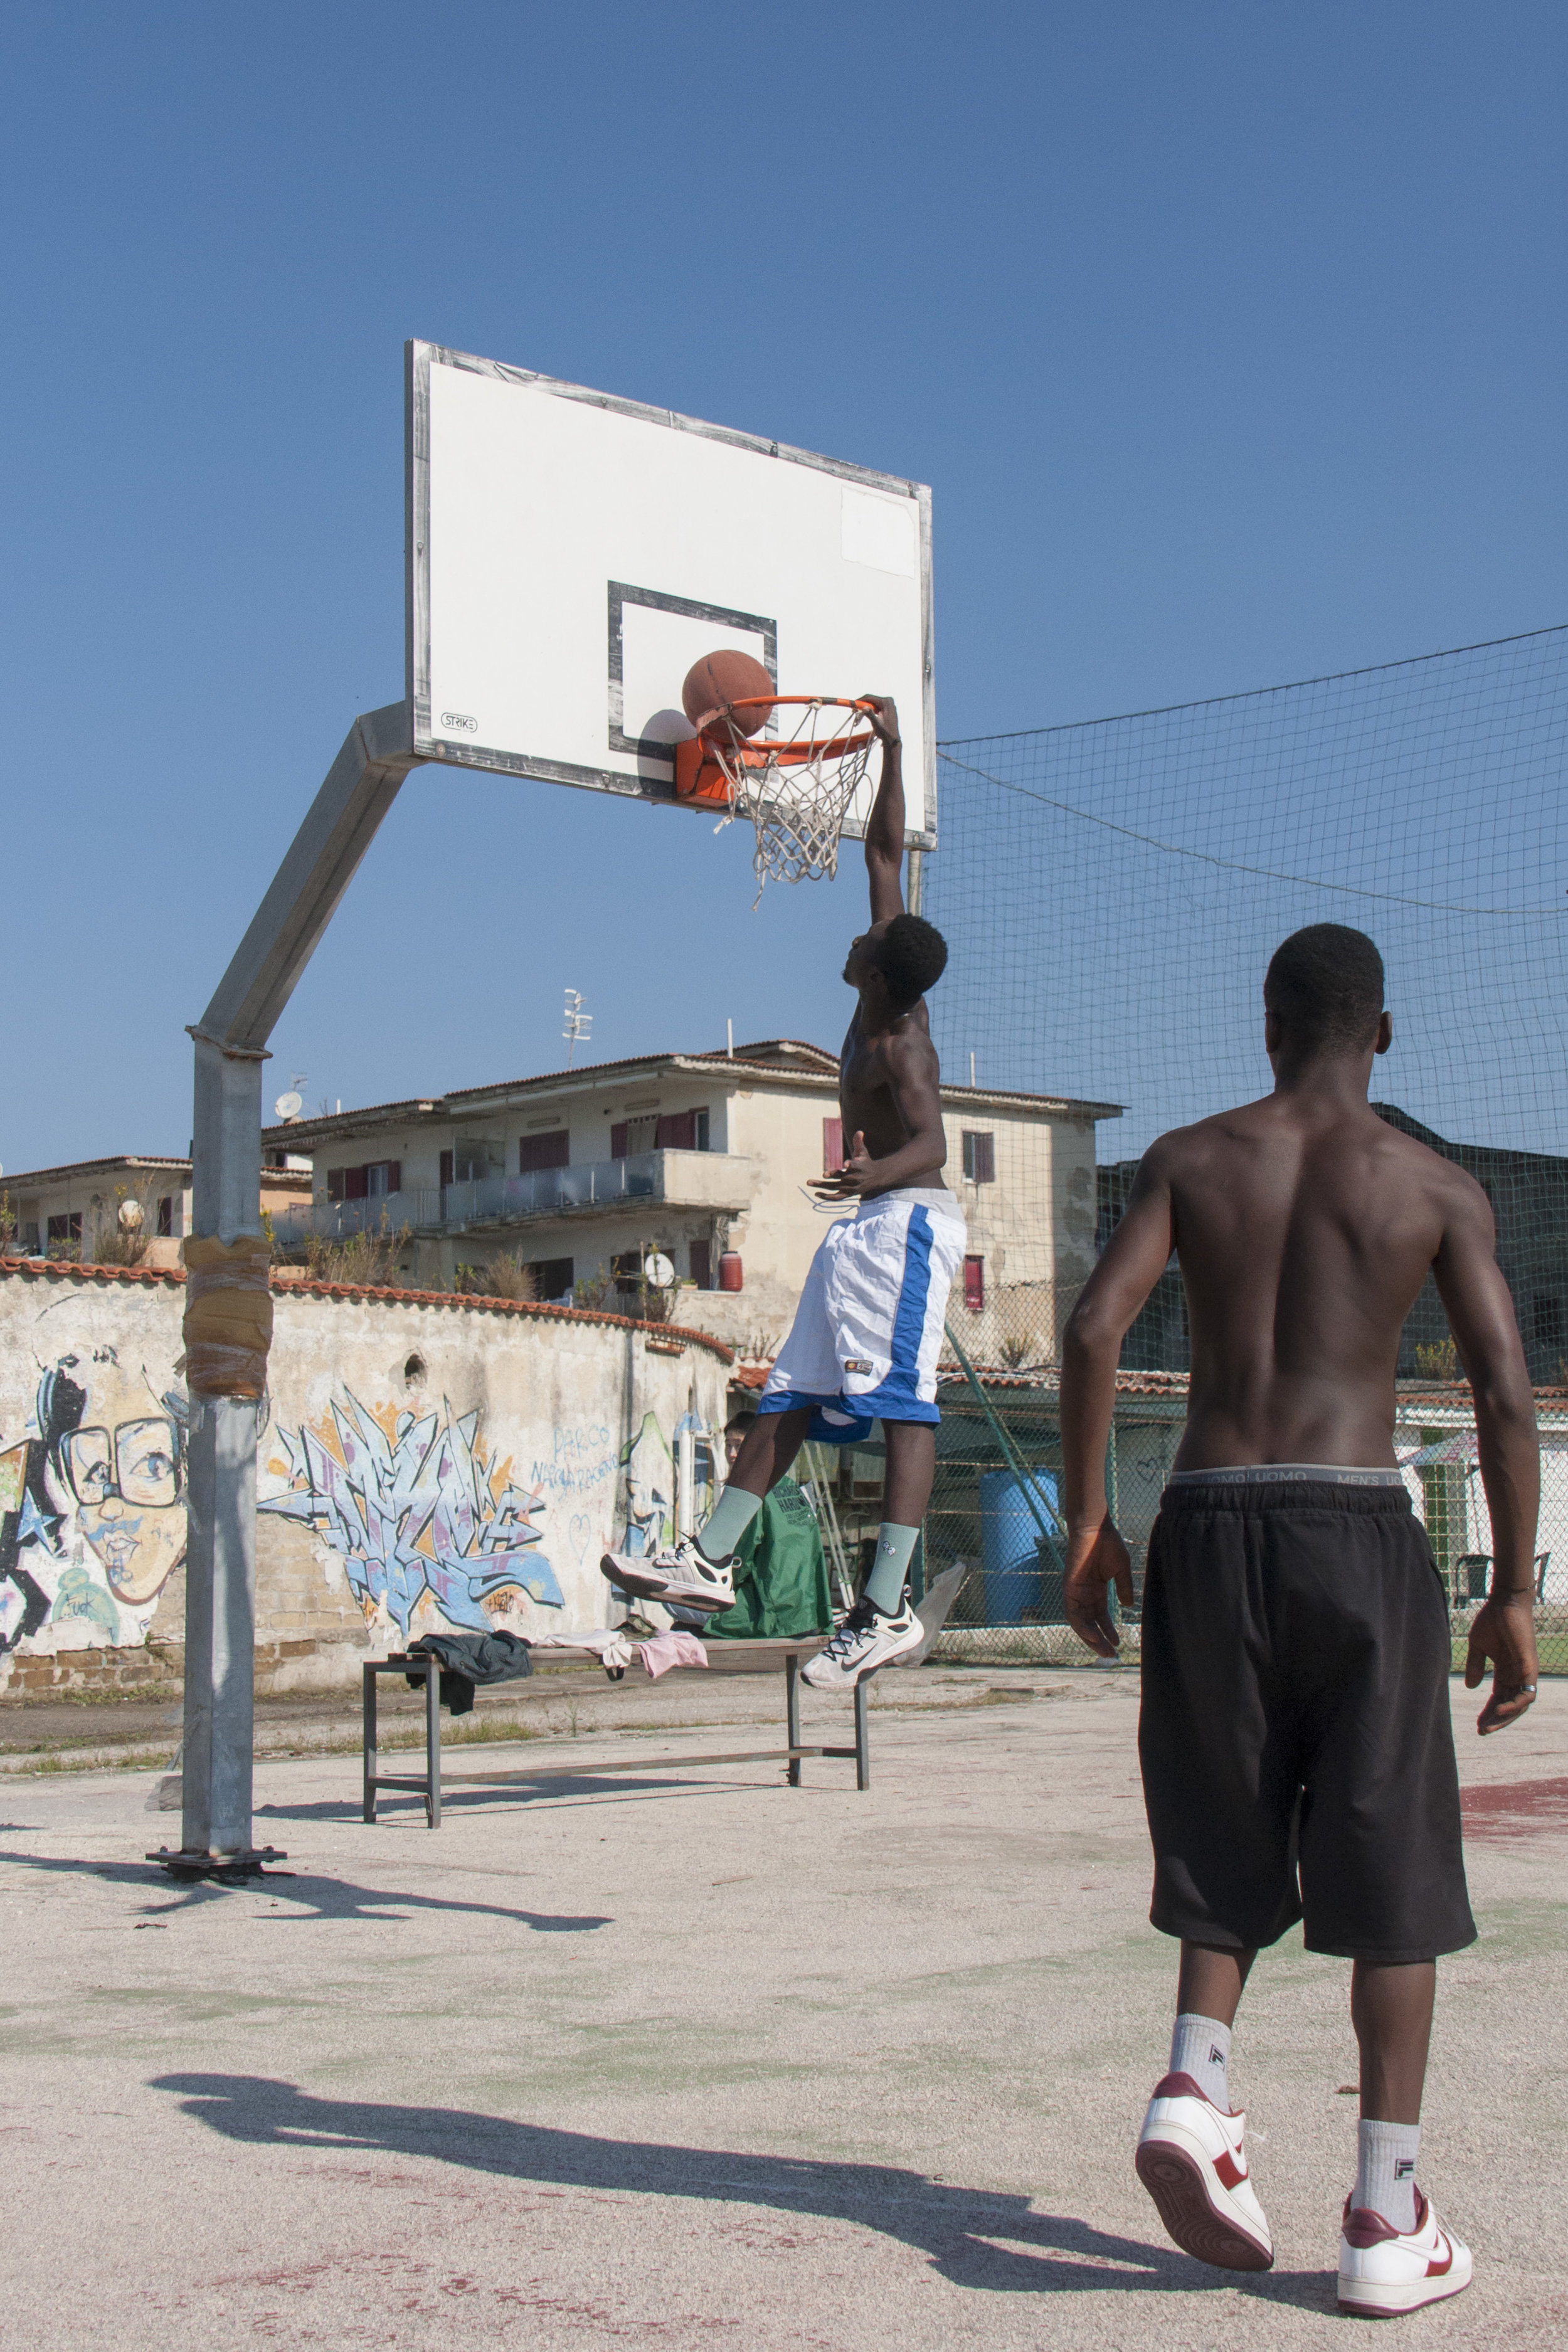 Practice makes perfect: James, a member of the Tam Tam Basket, making a dunk. Castel Volturno. Naples, Italy